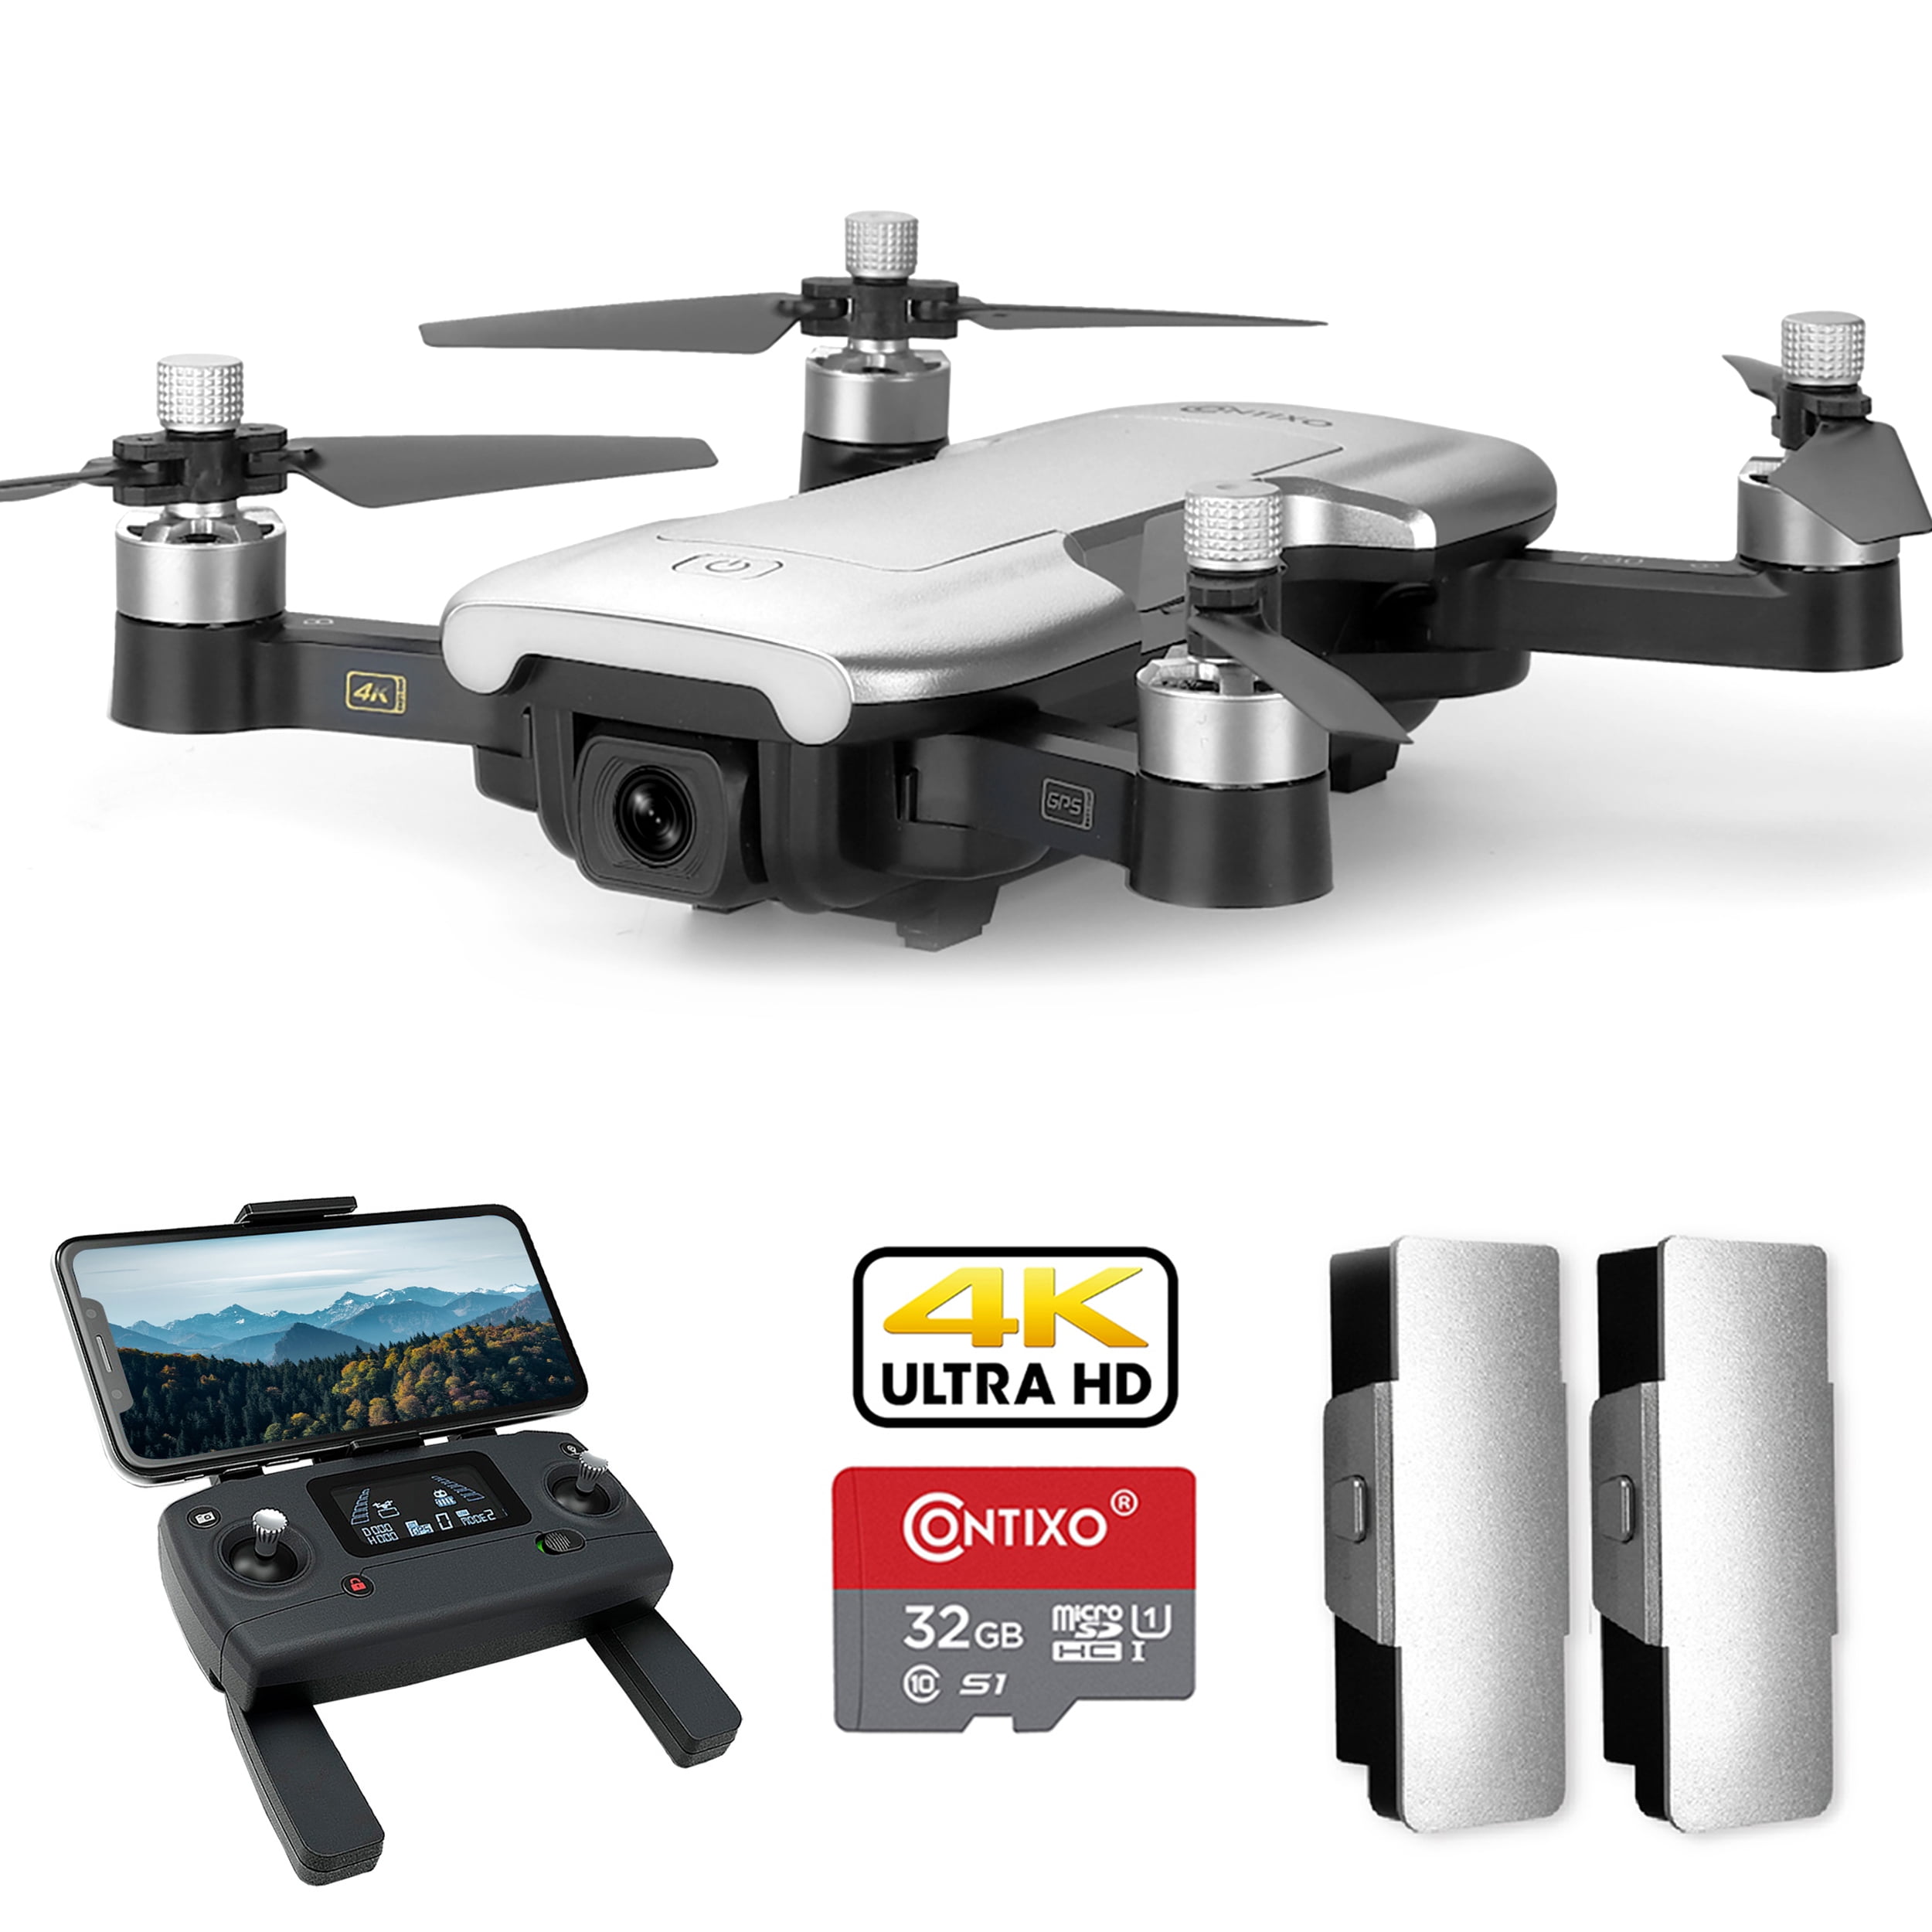 White Drone X Pro AIR 4K Ultra HD Dual Camera FPV WiFi Quadcopter Live Video Follow Me Mode Gesture Control 2 Batteries Included